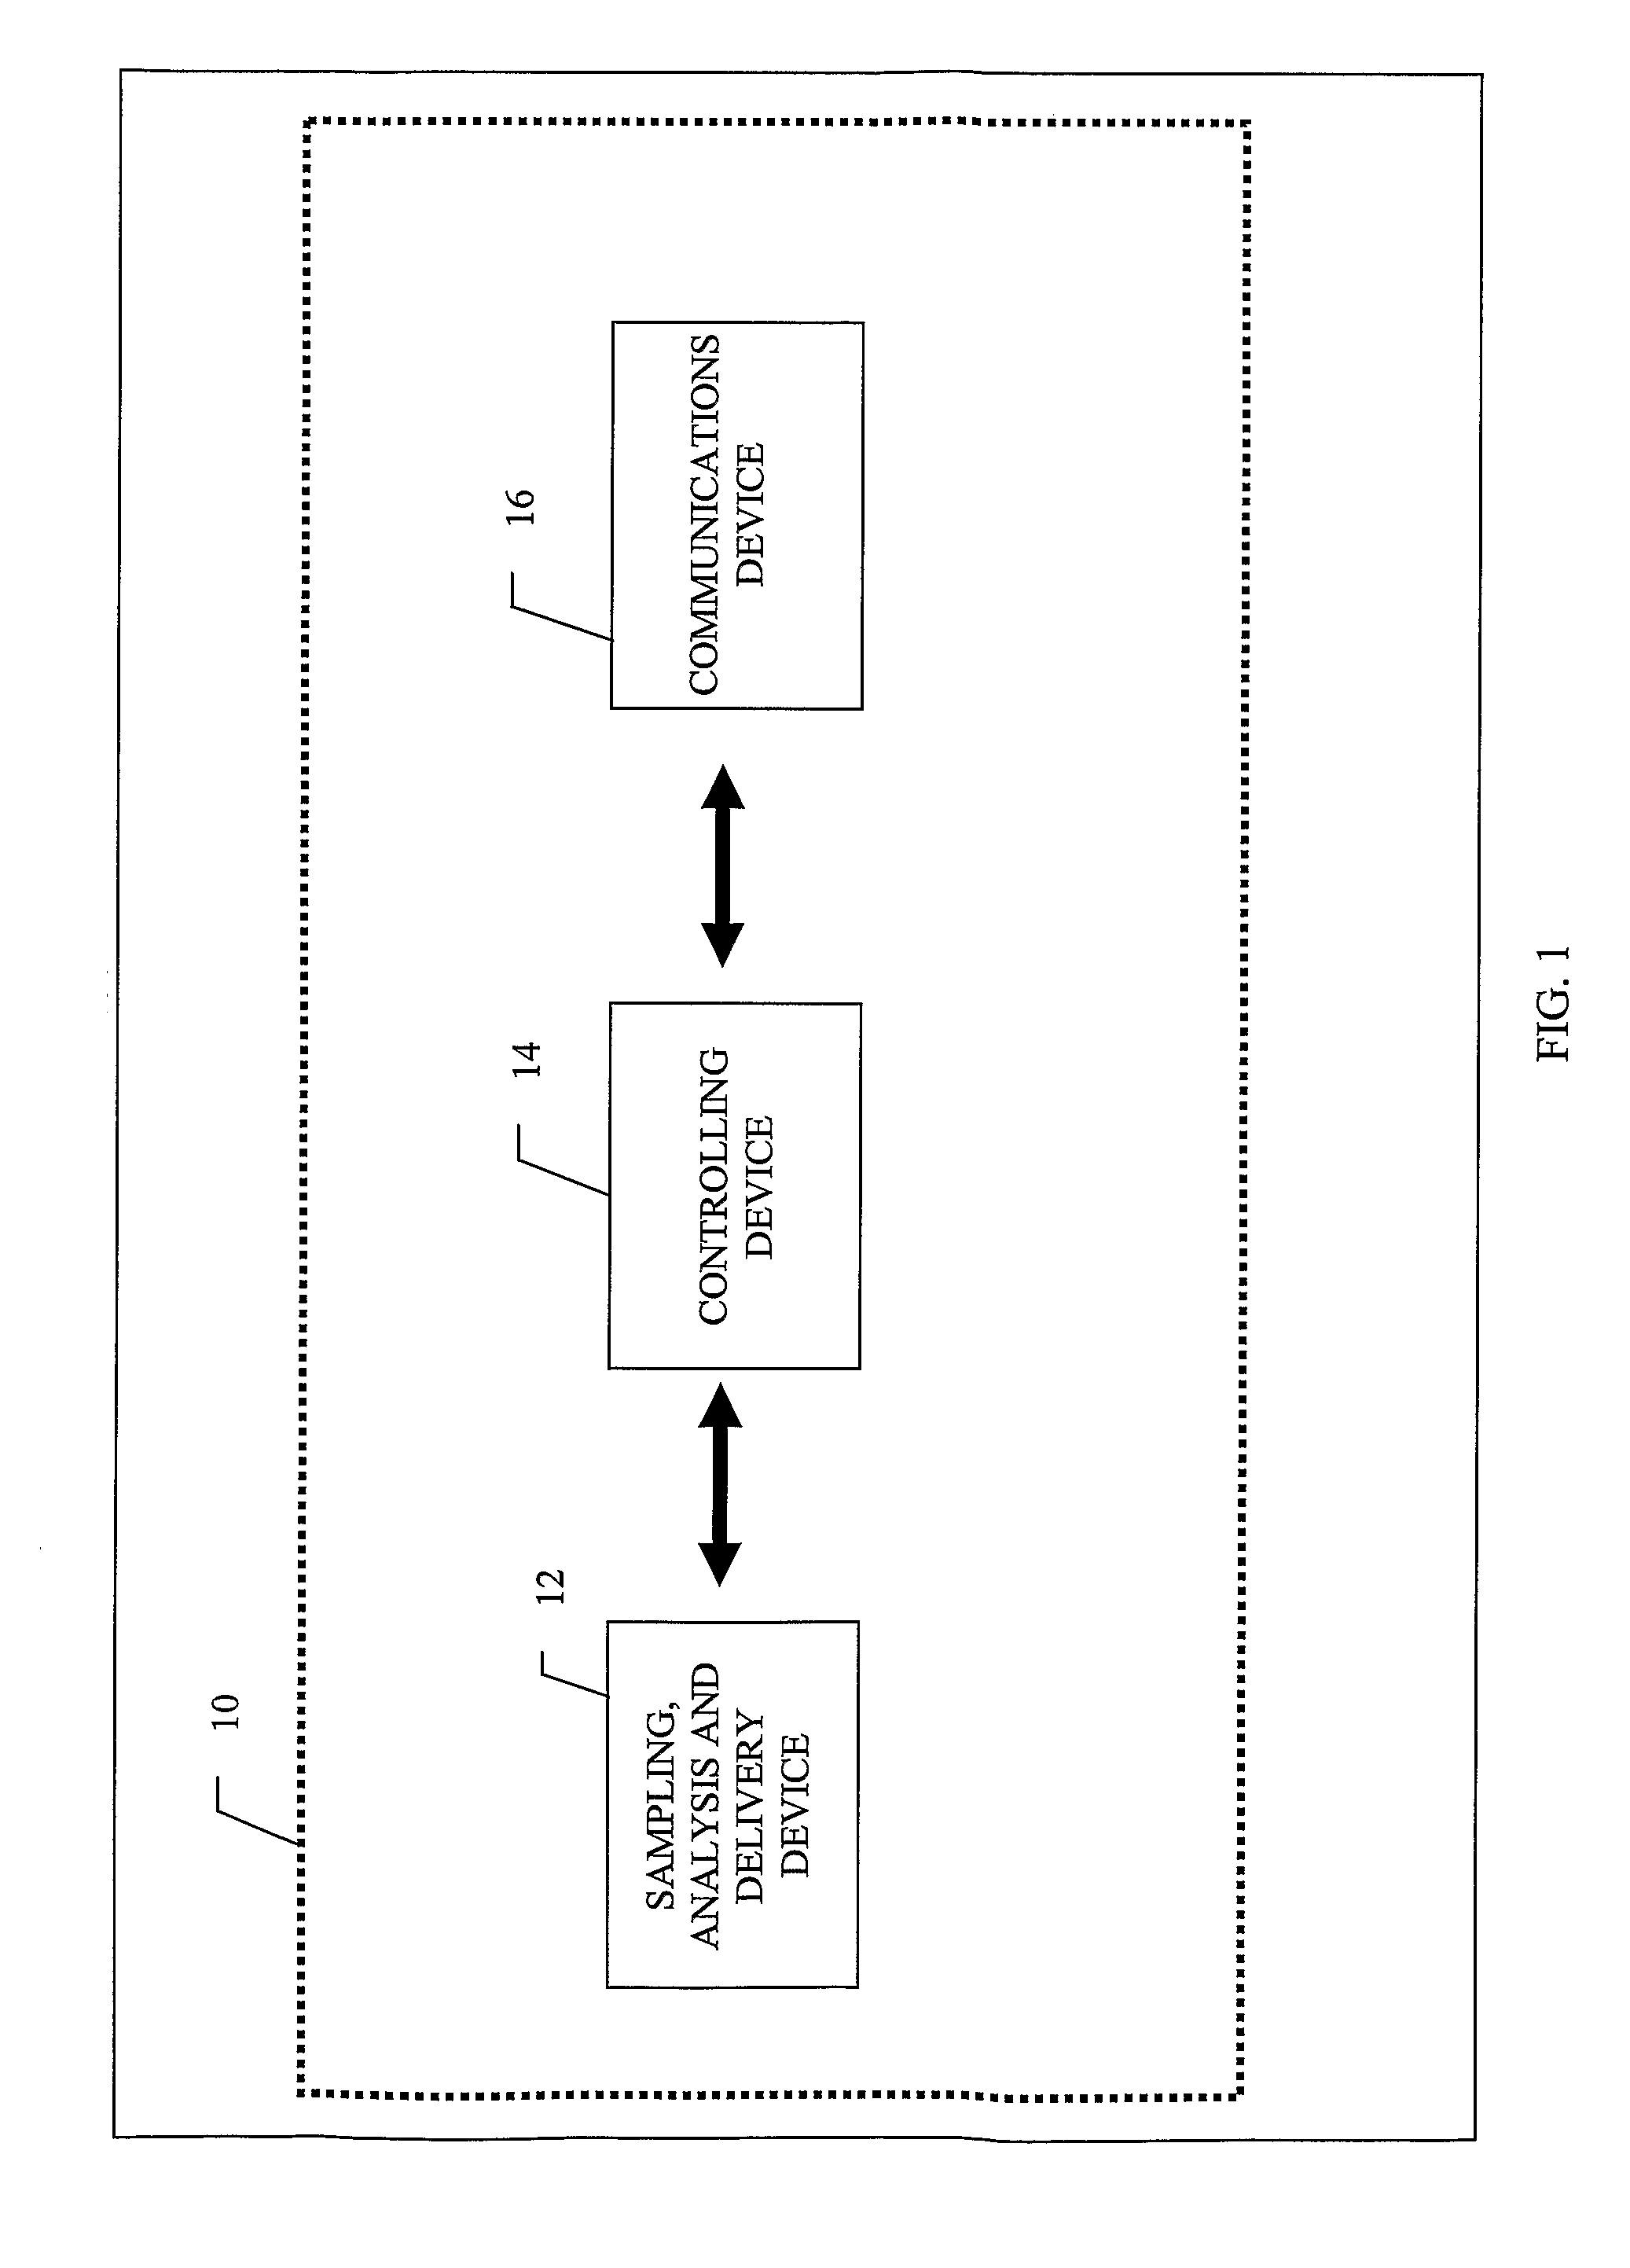 Flexible apparatus and method for monitoring and delivery